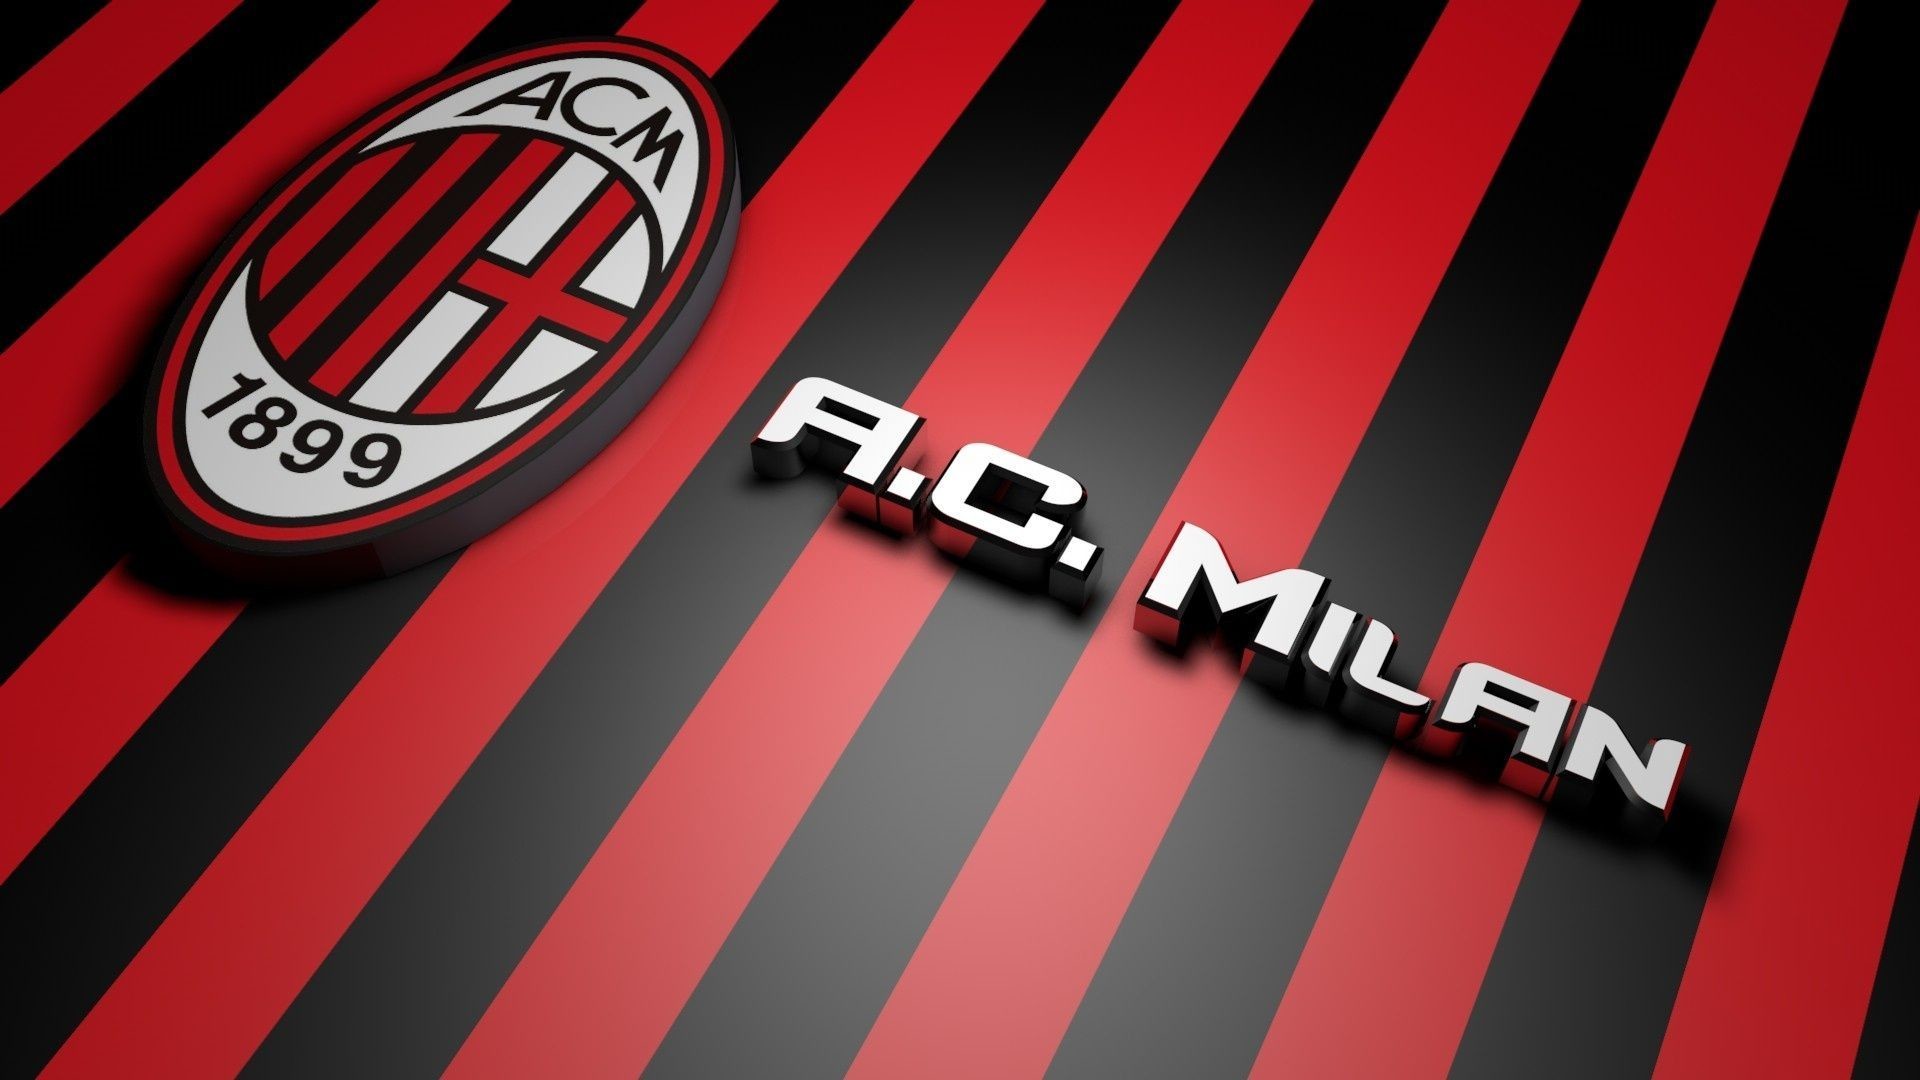 1920x1080 AC Milan 3D Football Logo Red and Black Background Full HD Wallpaper .